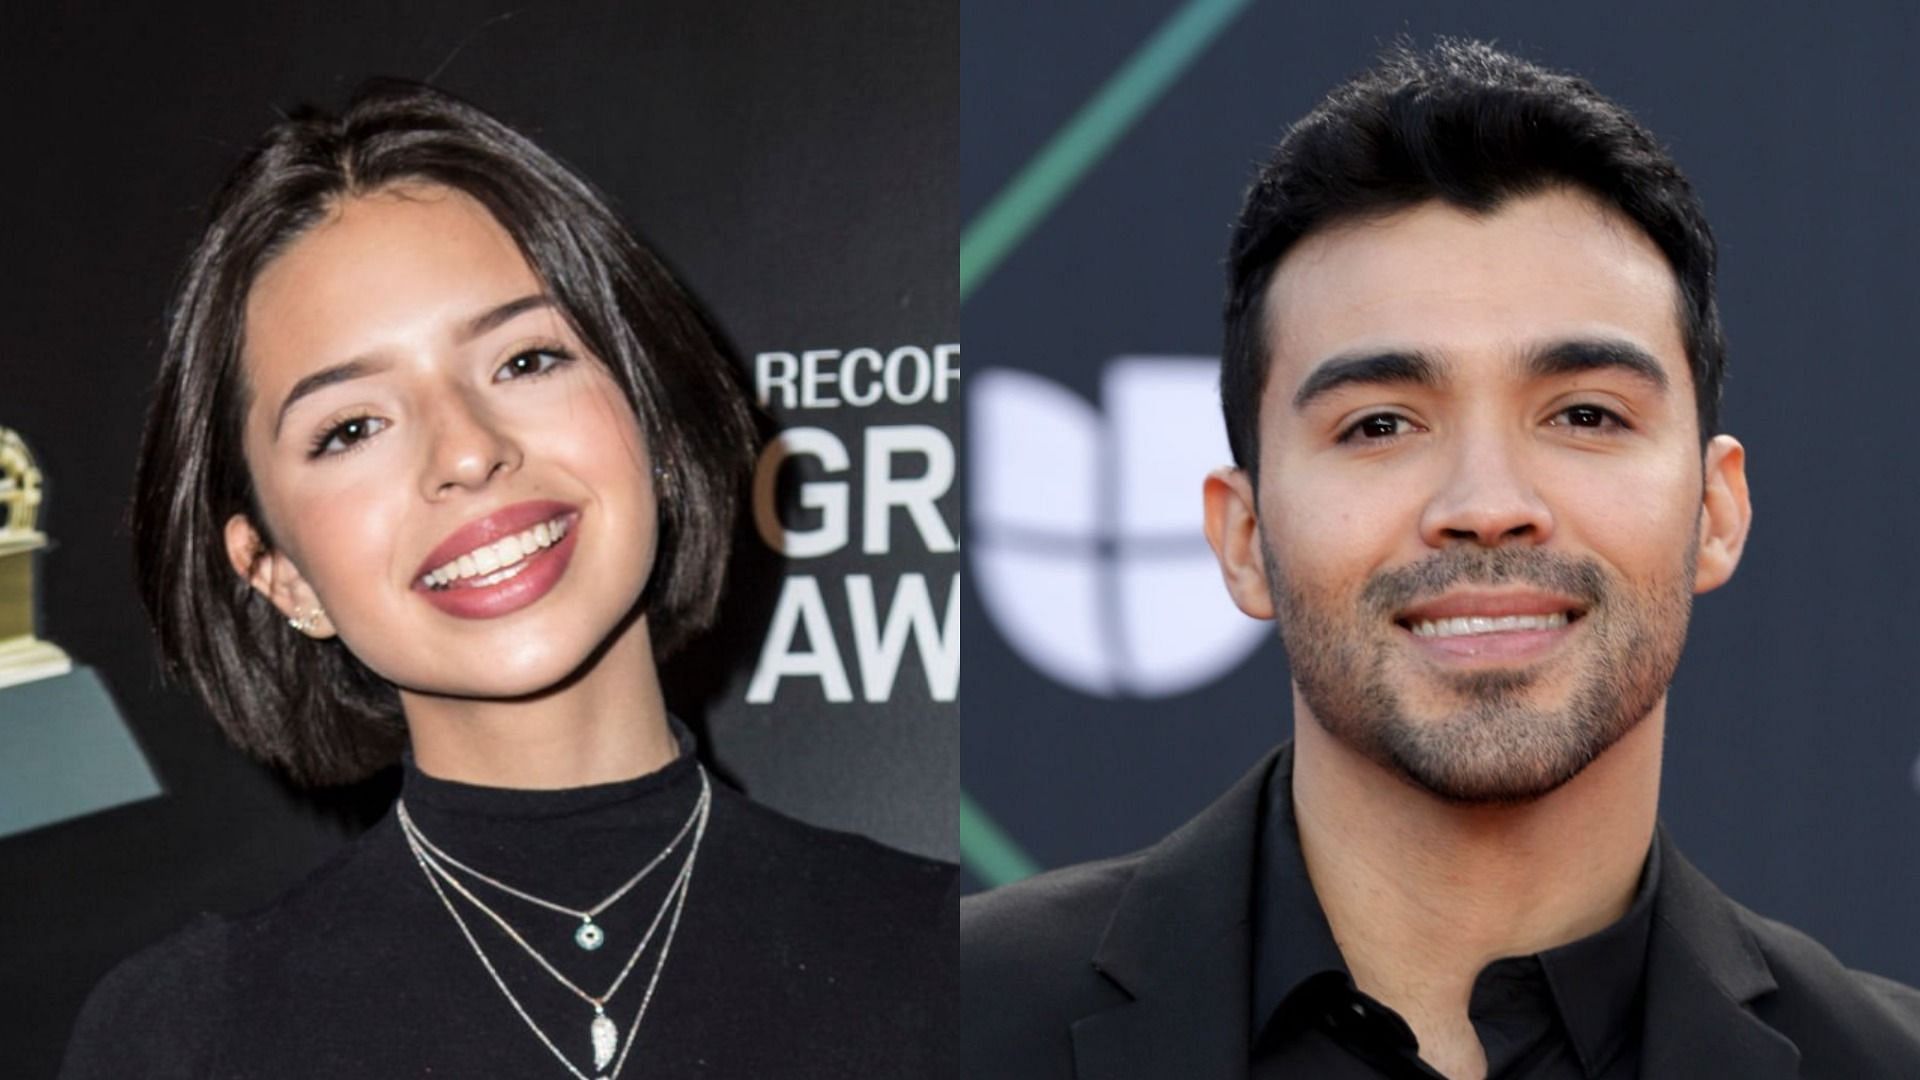 Angela Aguilar said she was &quot;sad and disappointed&quot; over Gussy Lau photo controversy (Image via Harmony Gerber/Getty Images and Shy McGrath/WireImage)